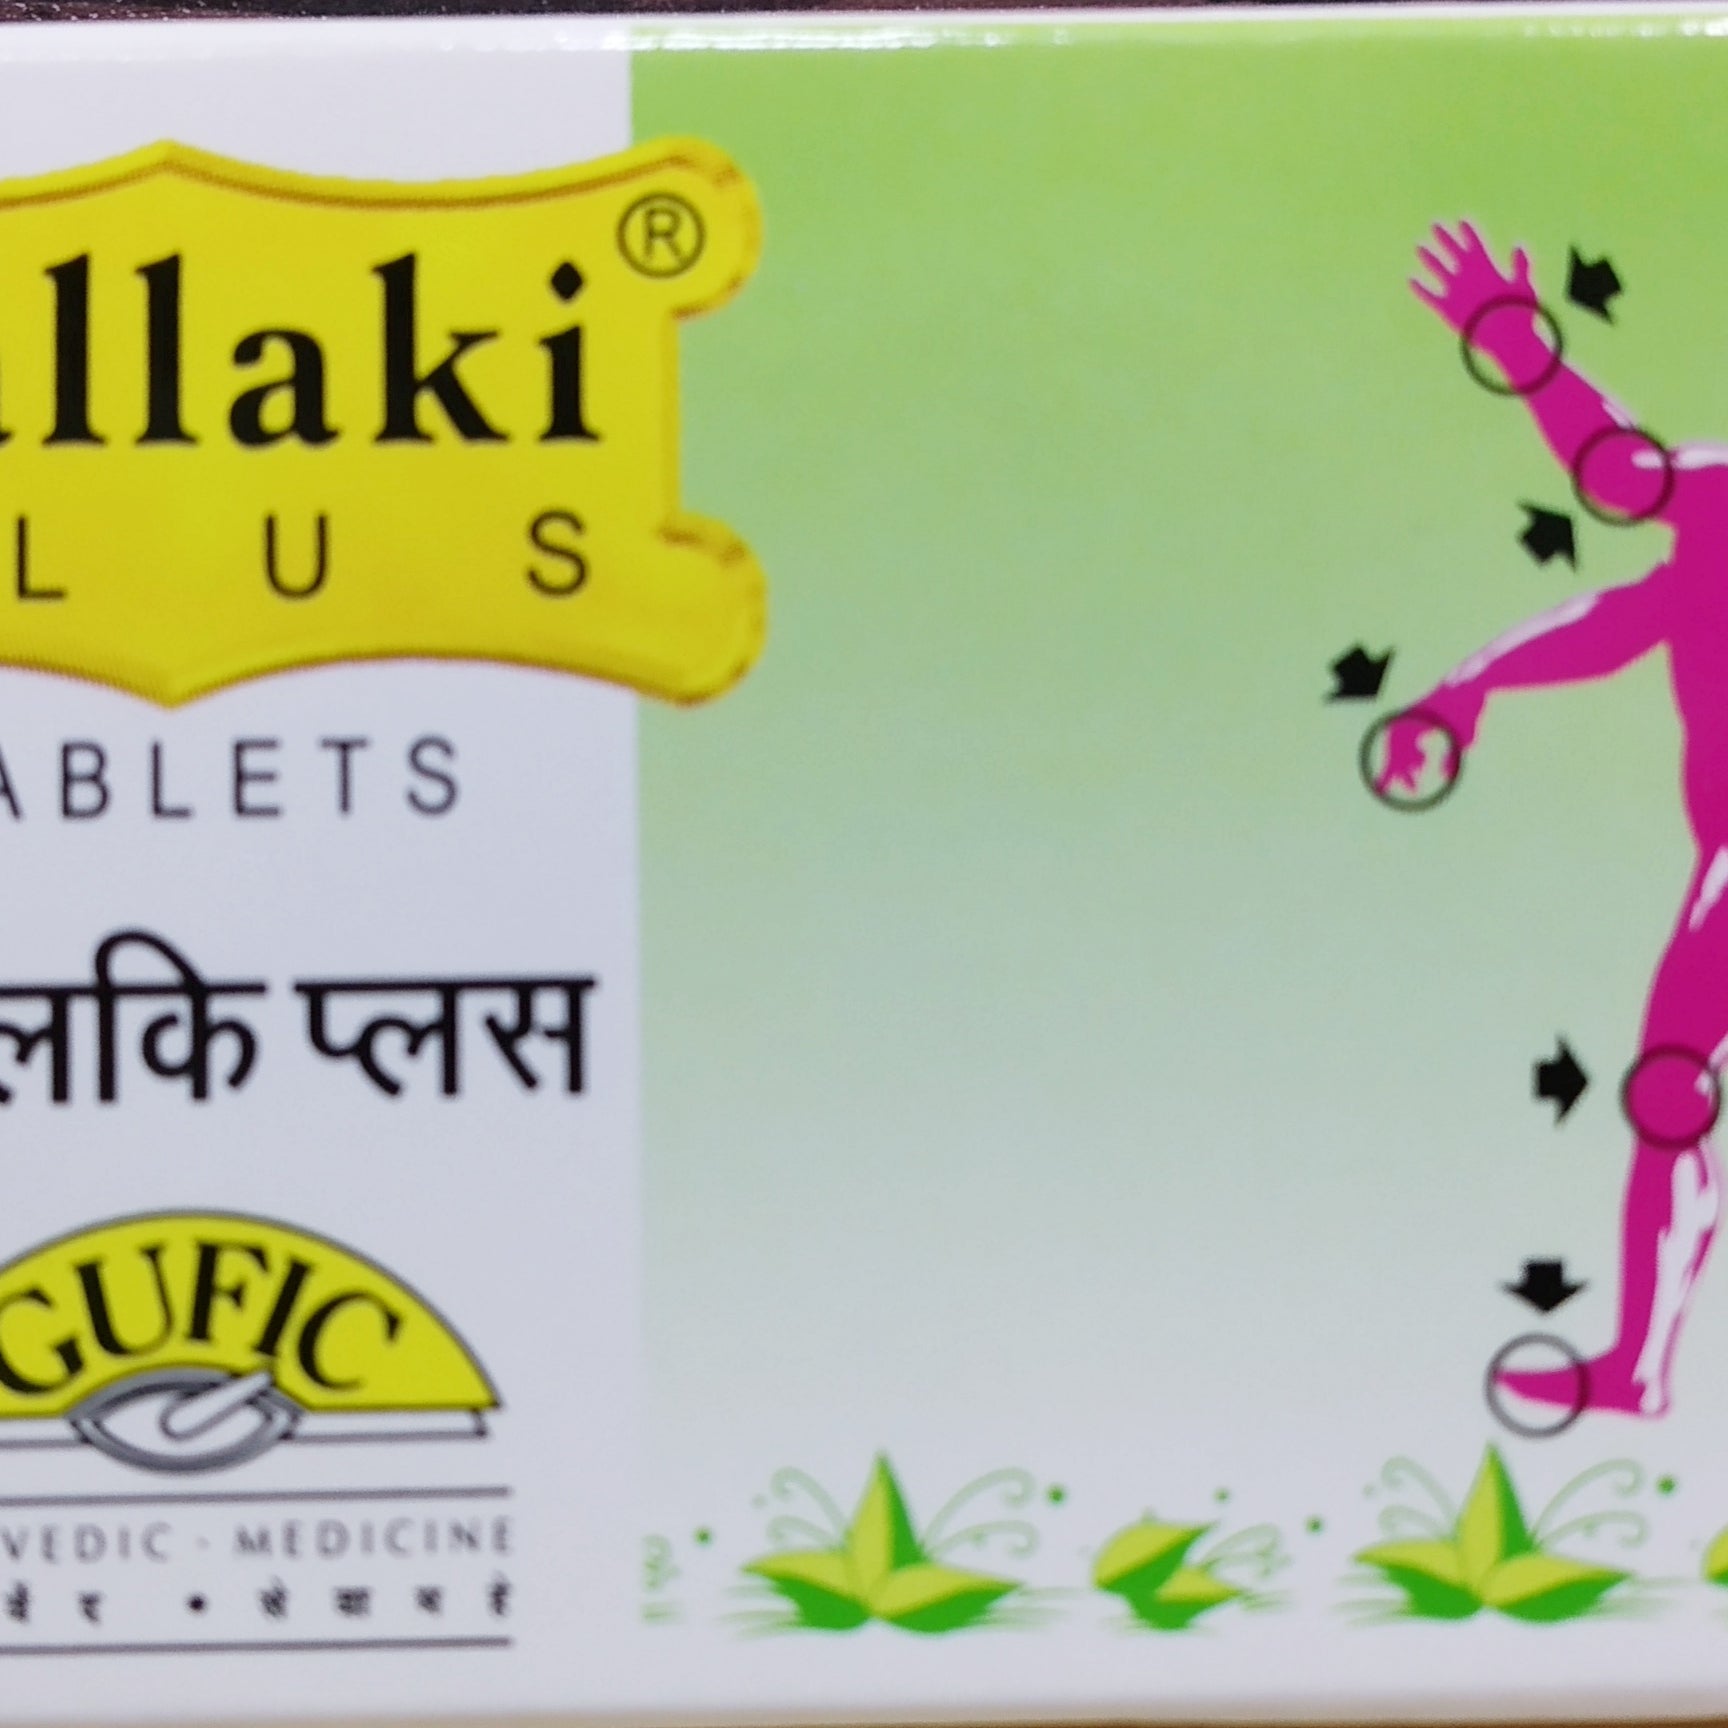 Shop Sallaki Plus 10Tablets at price 108.00 from Gufic Online - Ayush Care